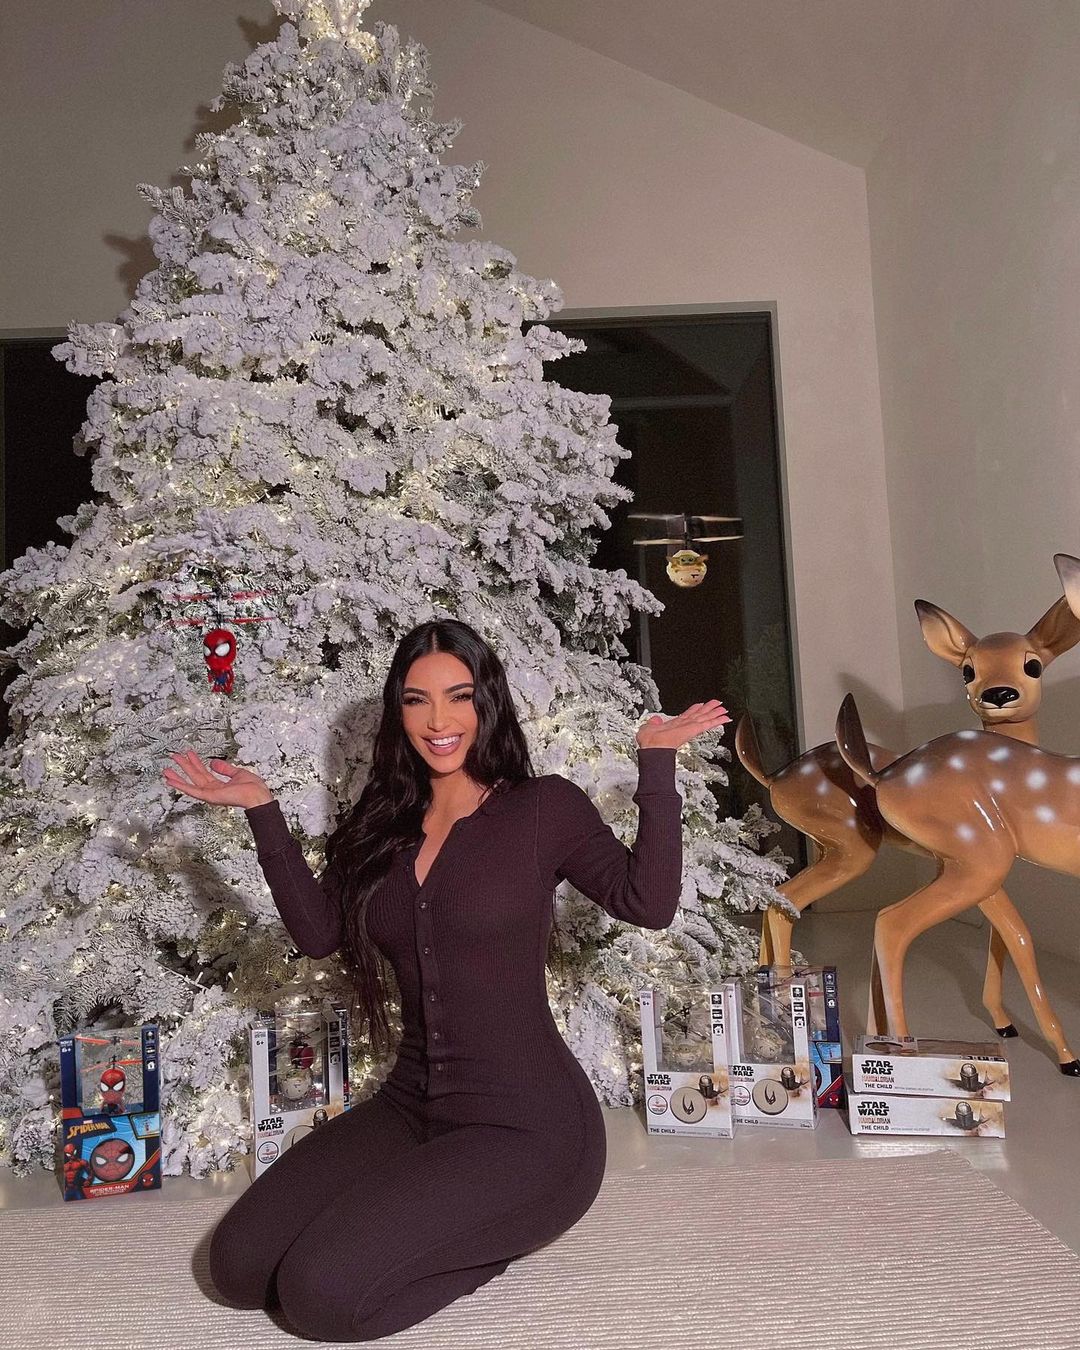 Kim has received mixed reviews over her Christmas decor at her $60 million Los Angeles, California mansion